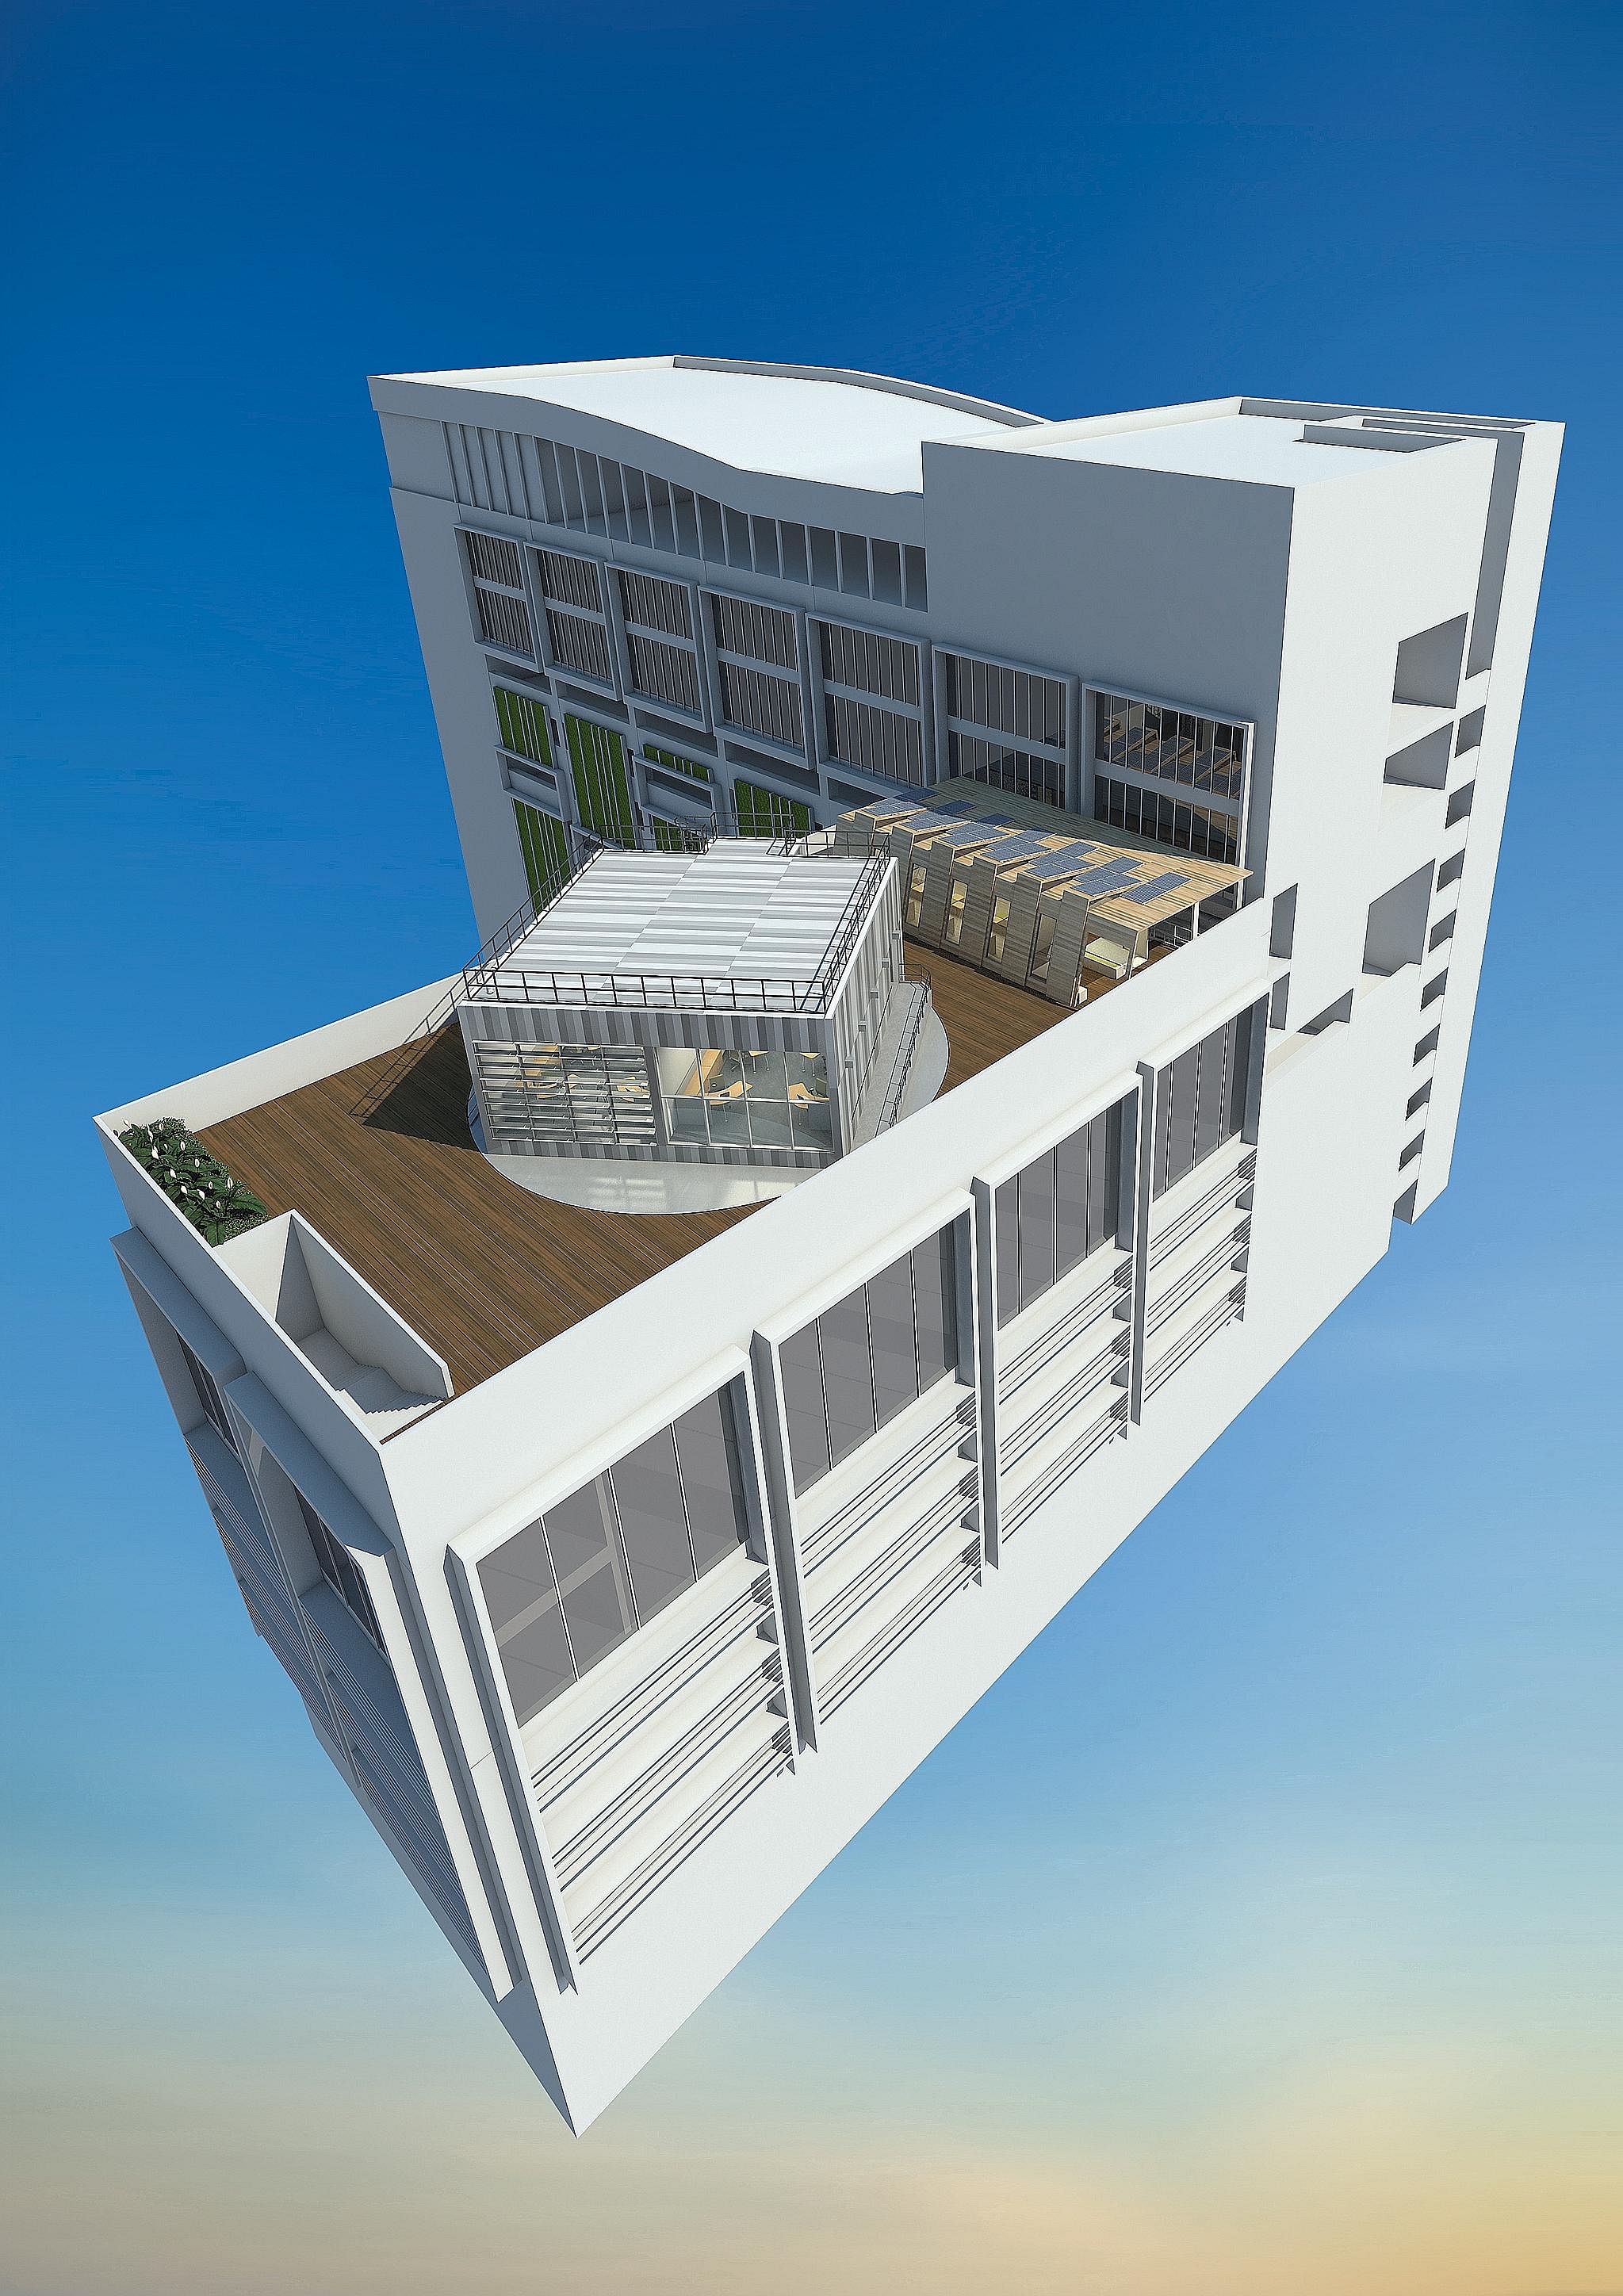 The rotating laboratory will be located on top of one of BCA's buildings at its Braddell Road premises. The BCA Skylab will be where researchers can test and develop green technology and materials.